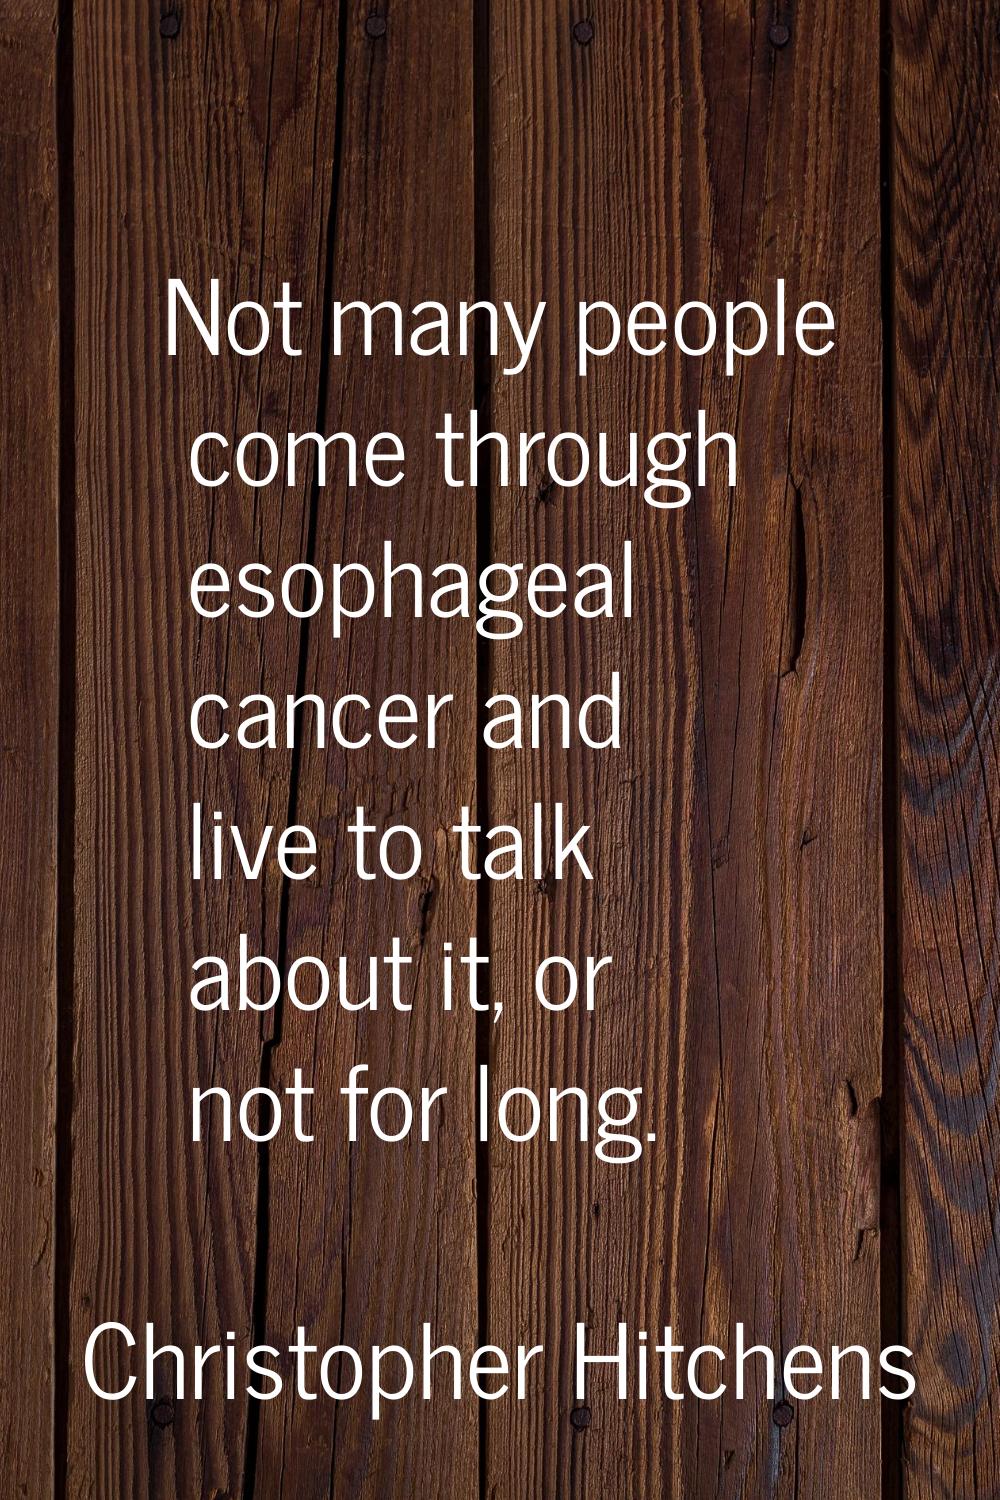 Not many people come through esophageal cancer and live to talk about it, or not for long.